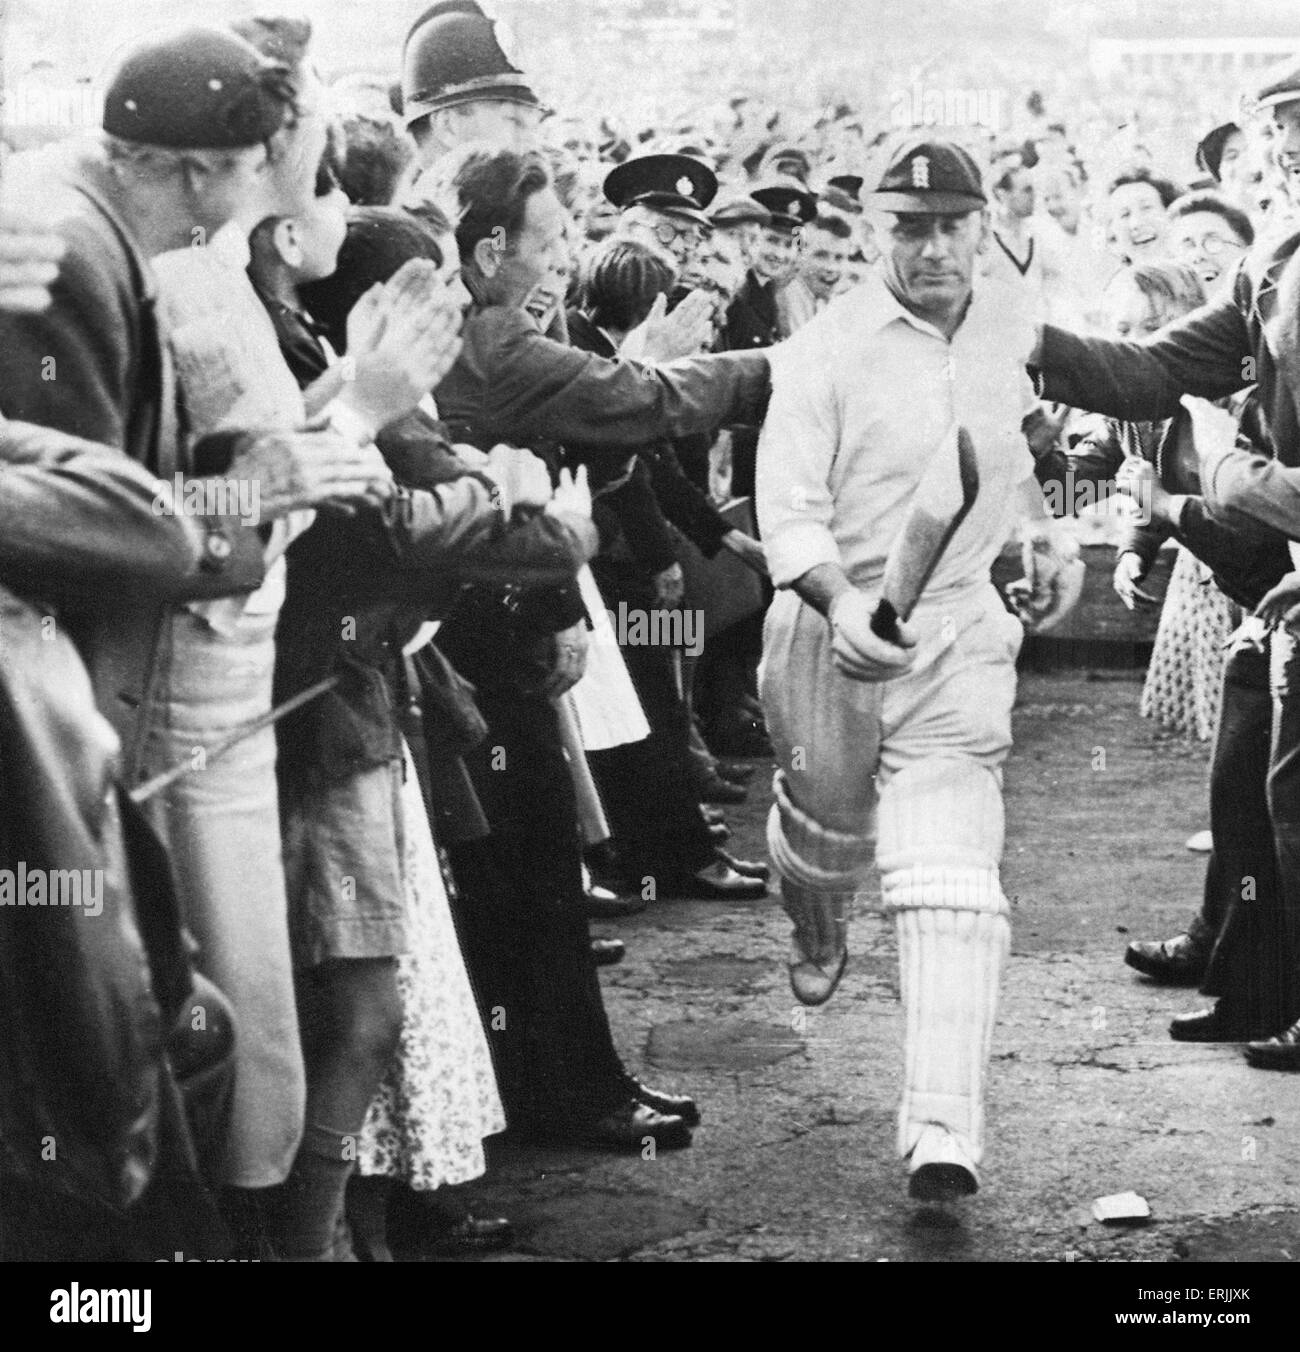 Australian cricket tour of England for the Ashes. England v Australia Third Test match at Headingley. Cyril Washbrook congratulated by fans as he exits the field. 13th July 1956. Stock Photo